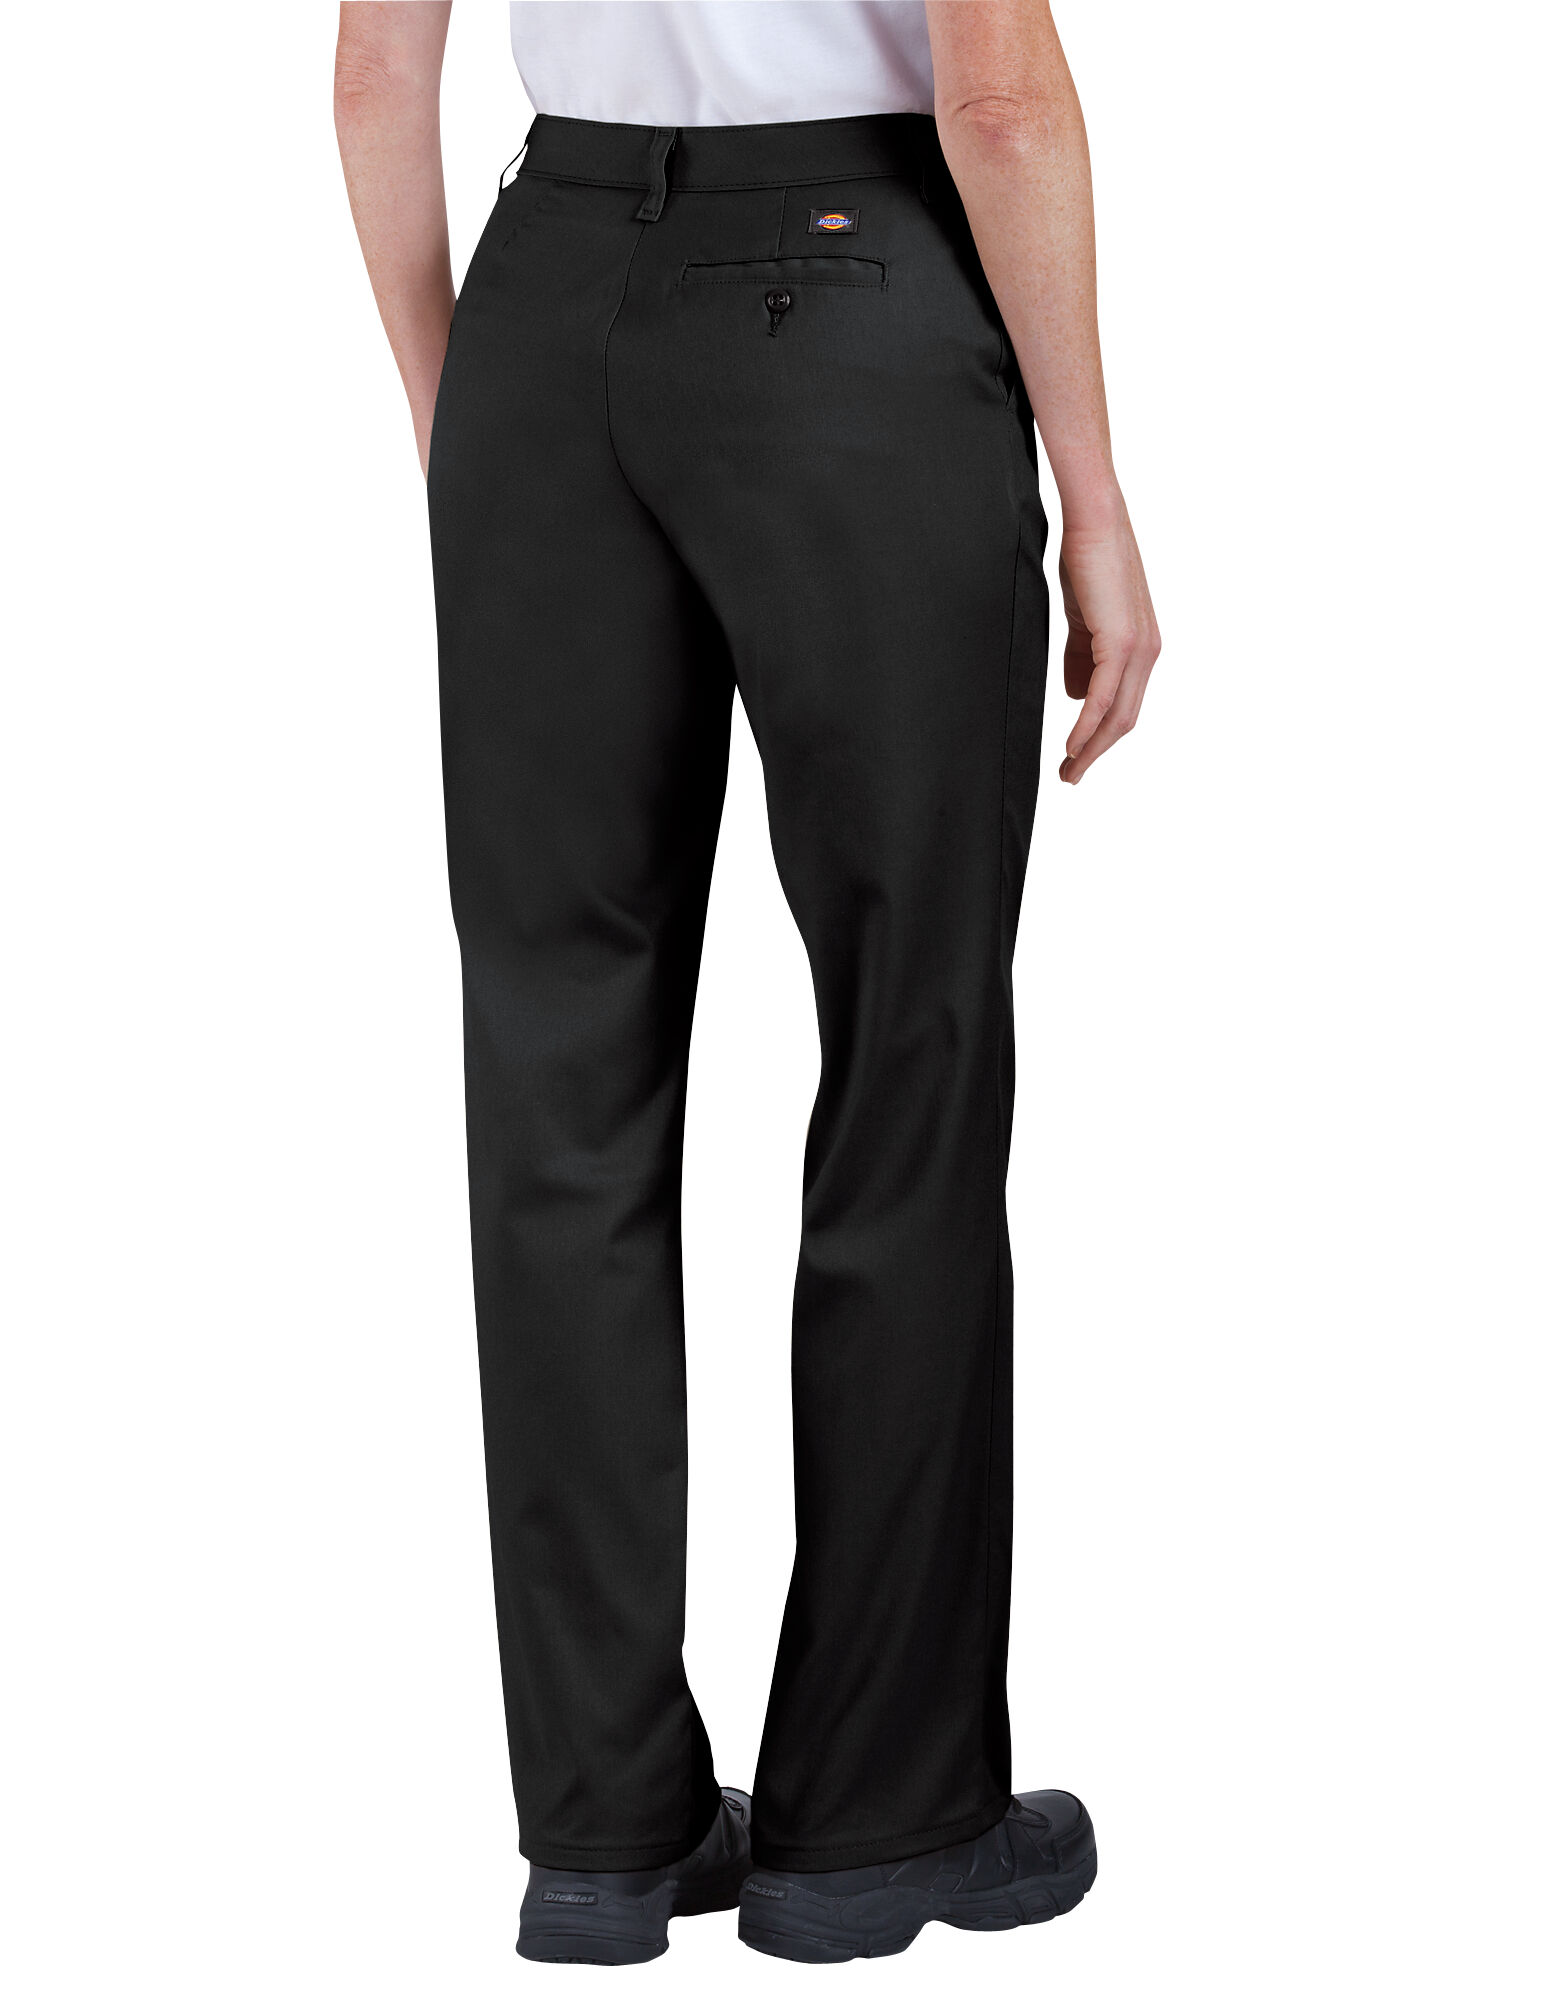 Women's Premium Relaxed Straight Flat Front Pants | Dickies